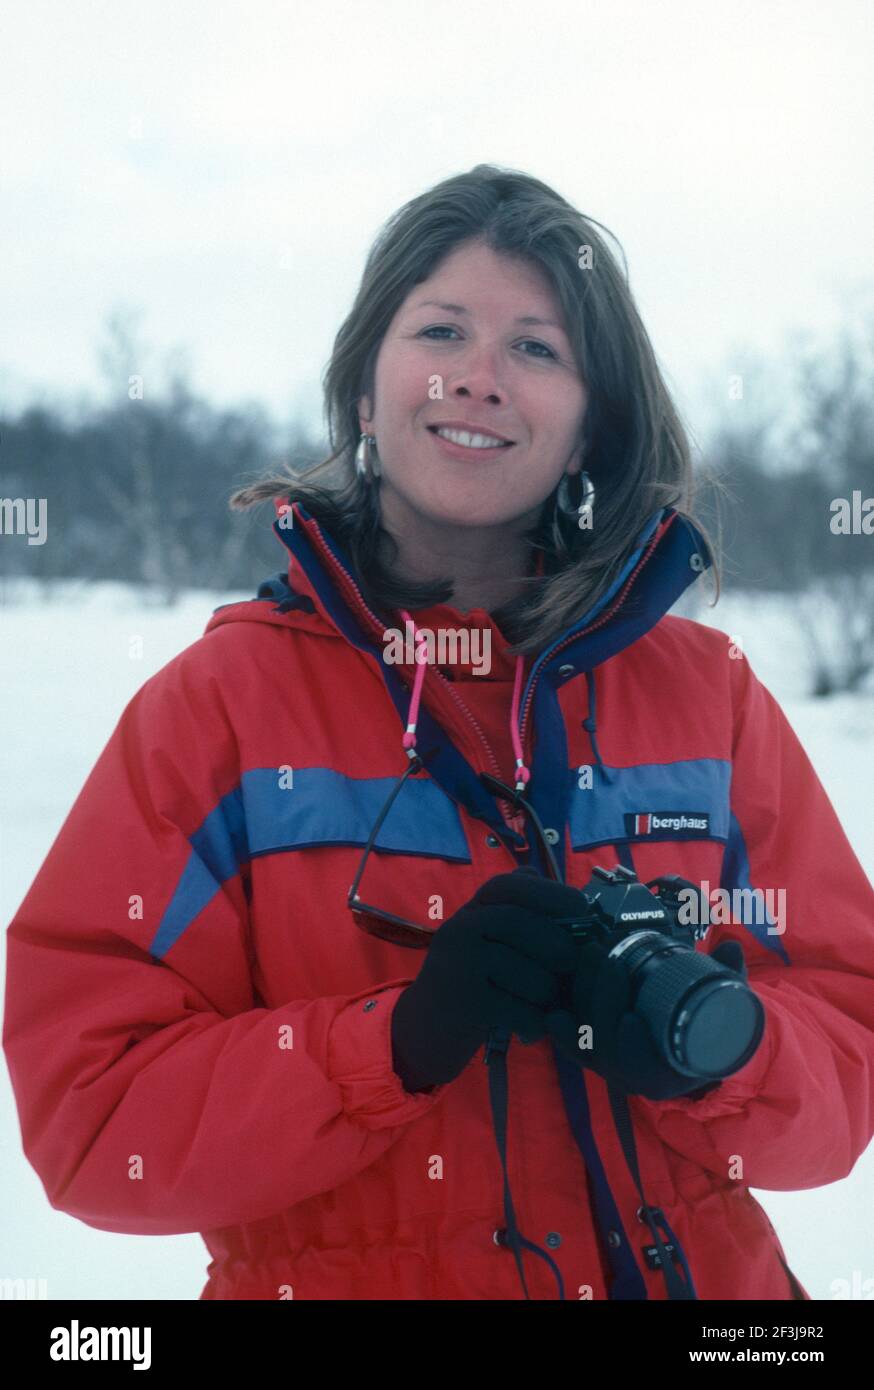 Rebecca Stephens MBE, first British woman to climb Mount Everest (1993), photographed in Abisko, northern Sweden, 1990 Stock Photo